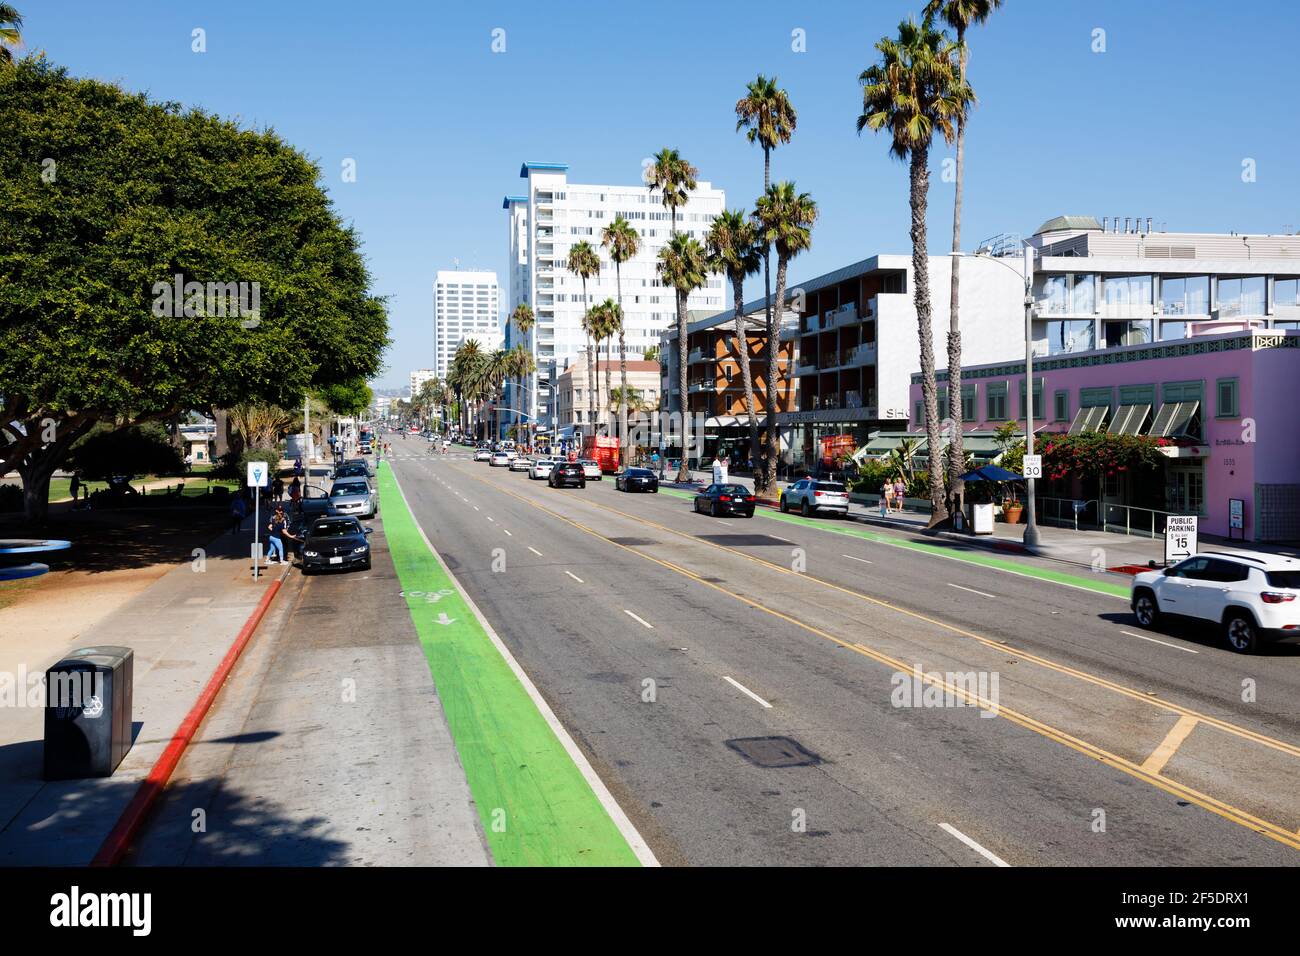 Ocean Avenue looking West. Downtown Santa Monica, Los Angeles, California, United States of America Stock Photo